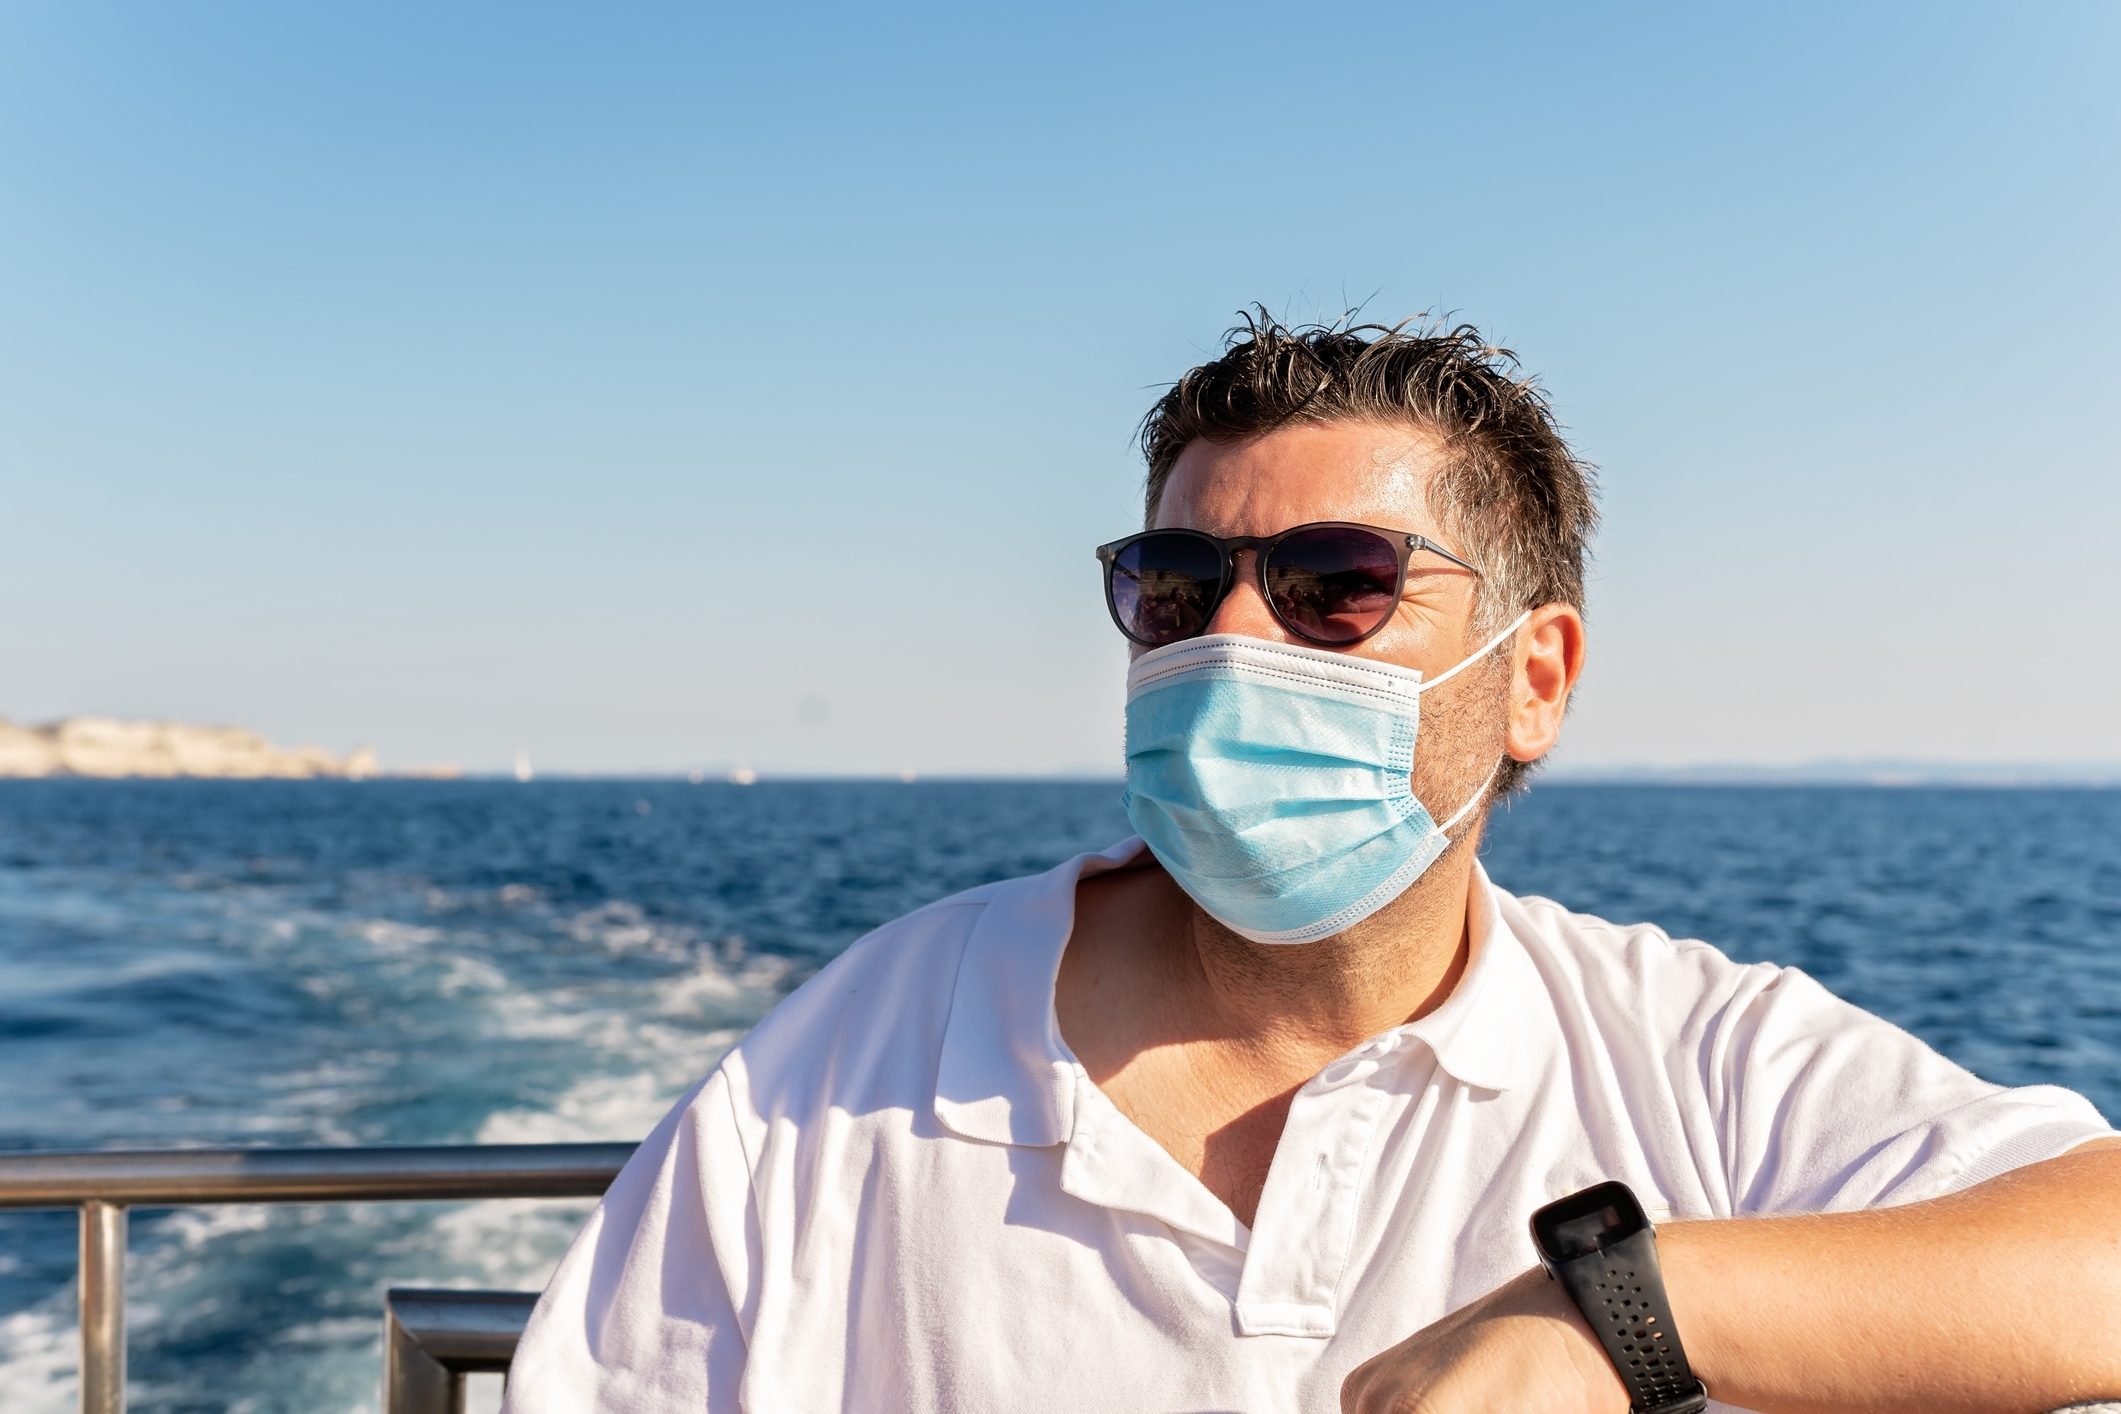 <p>Health protocols change often, especially post-pandemic. For instance, most cruise ships now require proof of COVID-19 vaccination. Some are still doing rapid tests before boarding. Most prefer (but don't require) you to wear a <a href="https://www.amazon.com/Certified-Respirator-Approval-TC-84A-9315-50-pack/dp/B08YS6WJZ3?th=1" rel="noopener">mask</a> if you develop any symptoms of illness while aboard. If you test positive for an infectious illness, you'll be quarantined. And remember, it's not just COVID they're concerned about: Outbreaks of norovirus and influenza are common in the close quarters of cruise ships.</p> <p><strong>What to do instead</strong><strong>:</strong> Stay up to date on the current rules, and do your best to follow them. This information should be given to you the week before your cruise, via email or your online portal. You can also check the website, call customer service or talk to a host during the boarding process. But please don't argue with us—we don't make the rules. If you need clarification or an exception, speak to the ship's doctor.</p>